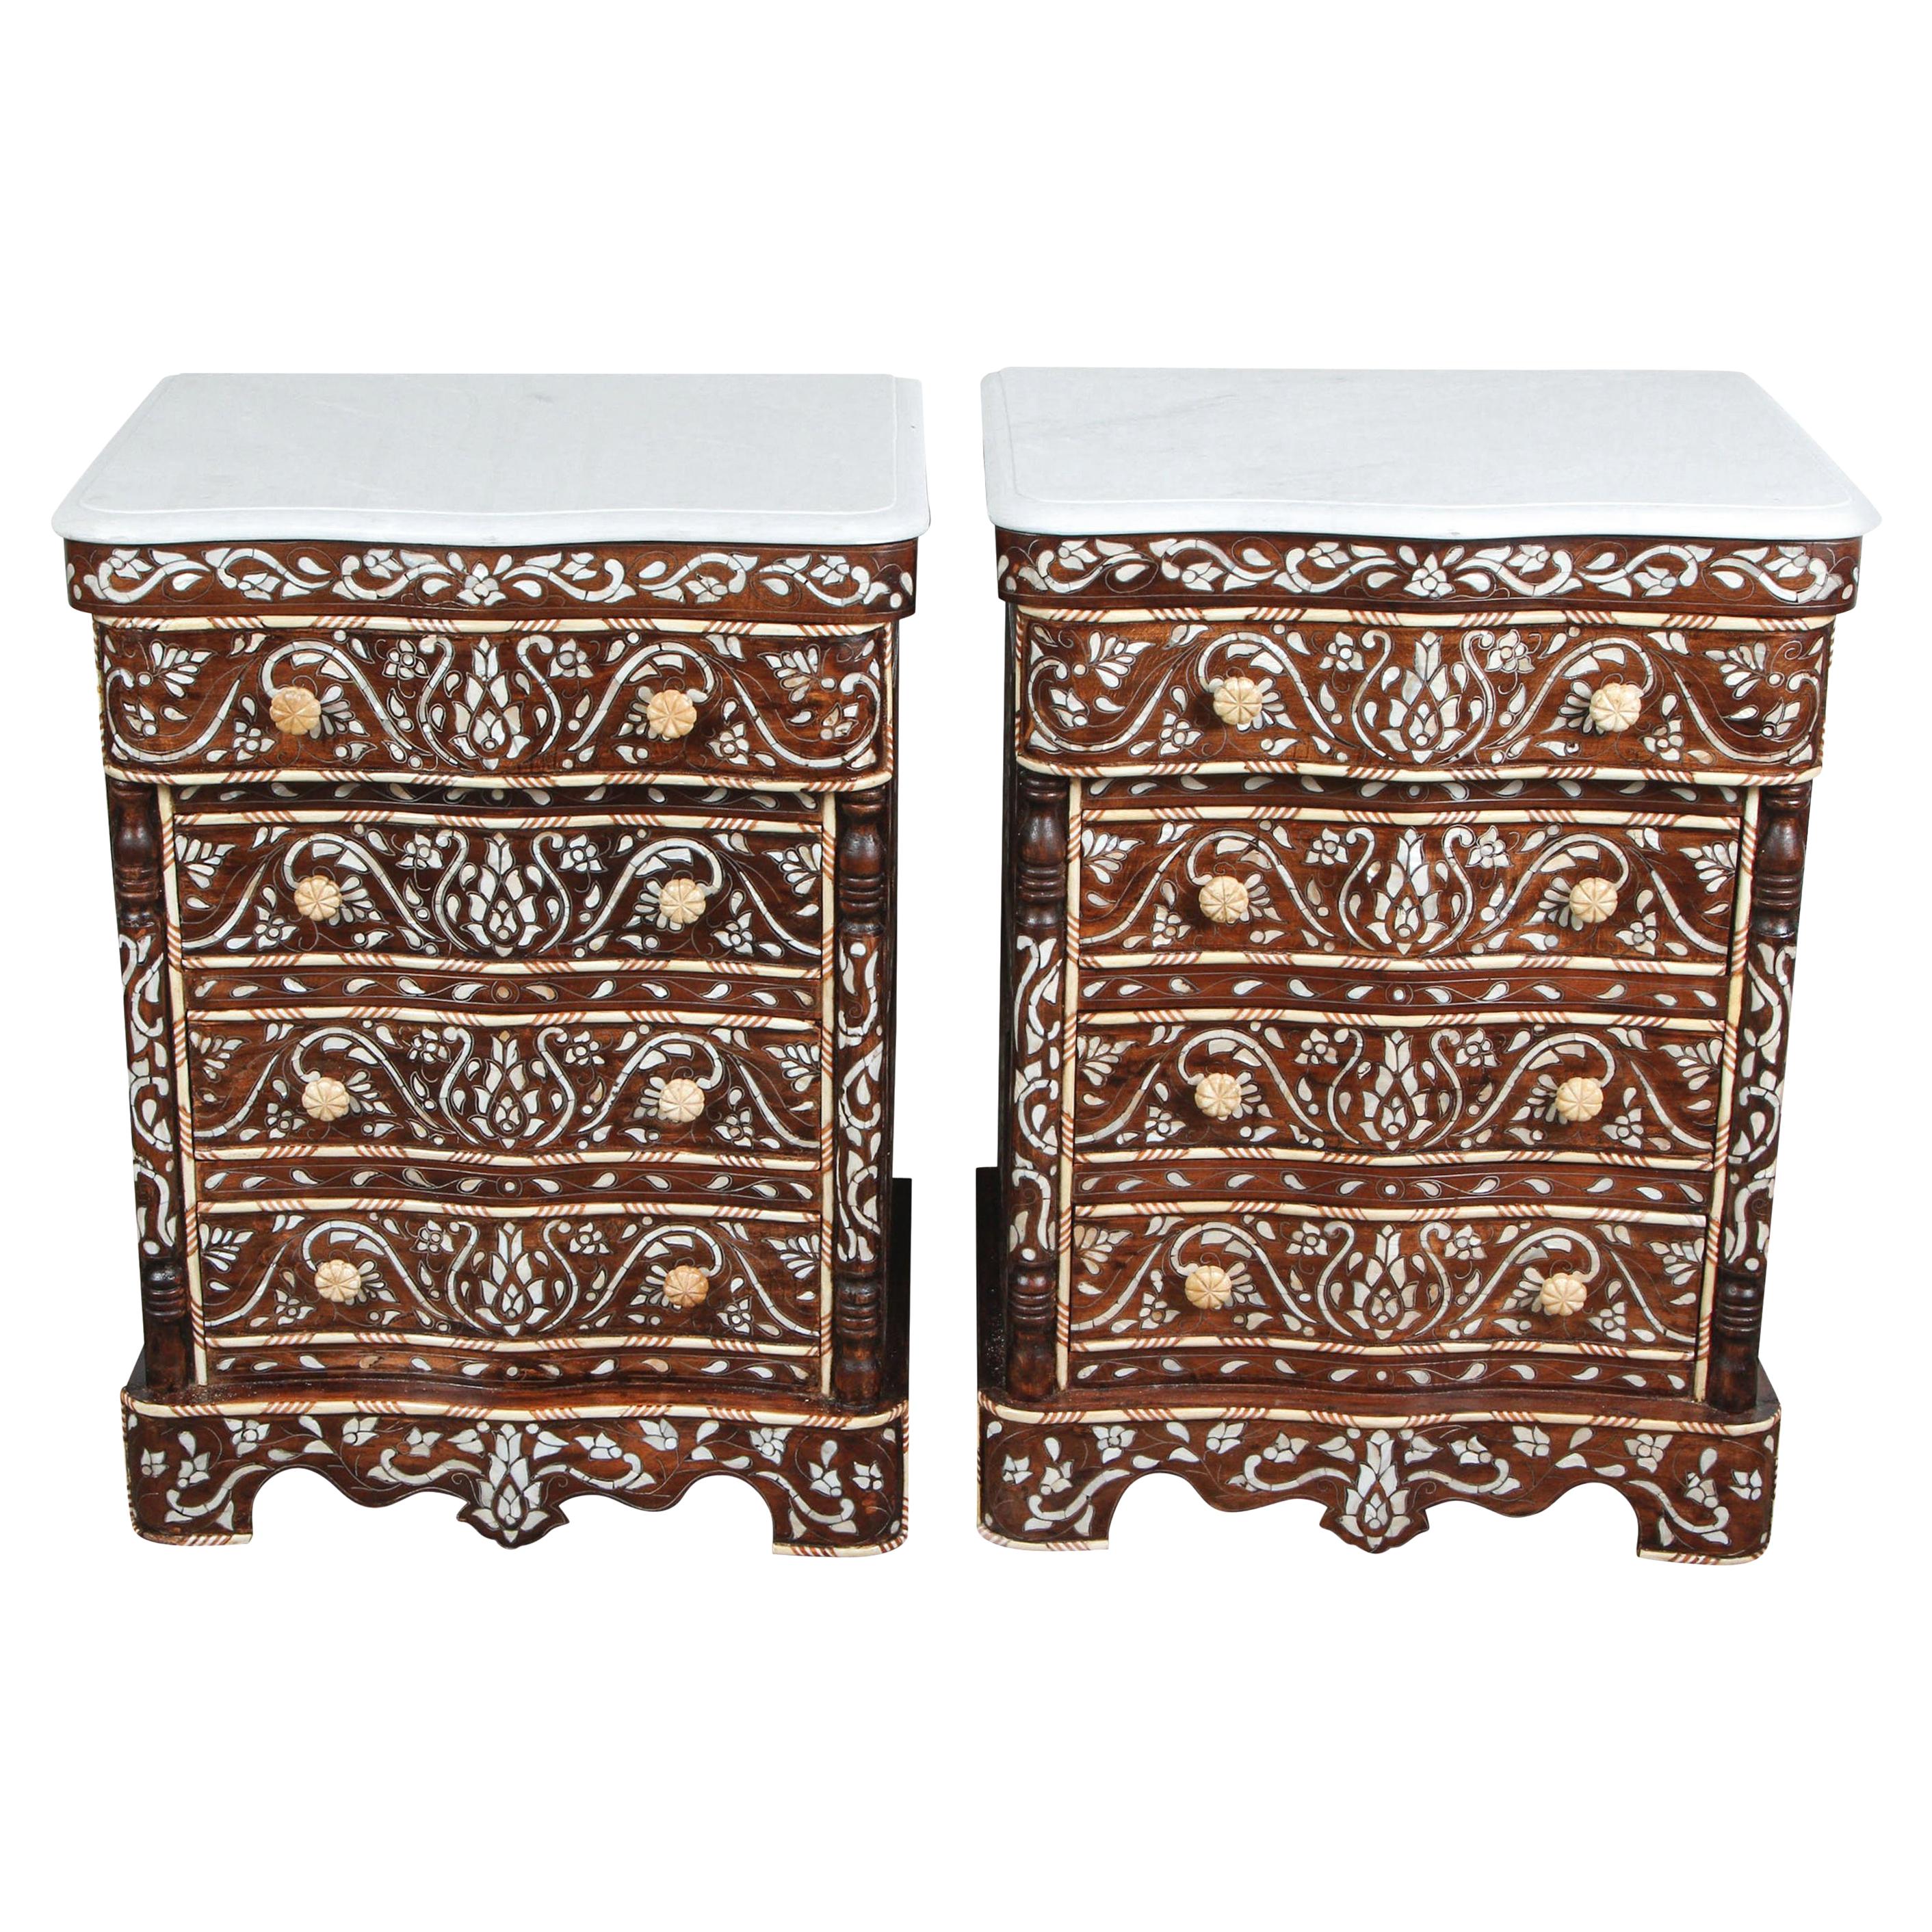 Pair of Syrian Mother of Pearl Inlay Nightstands